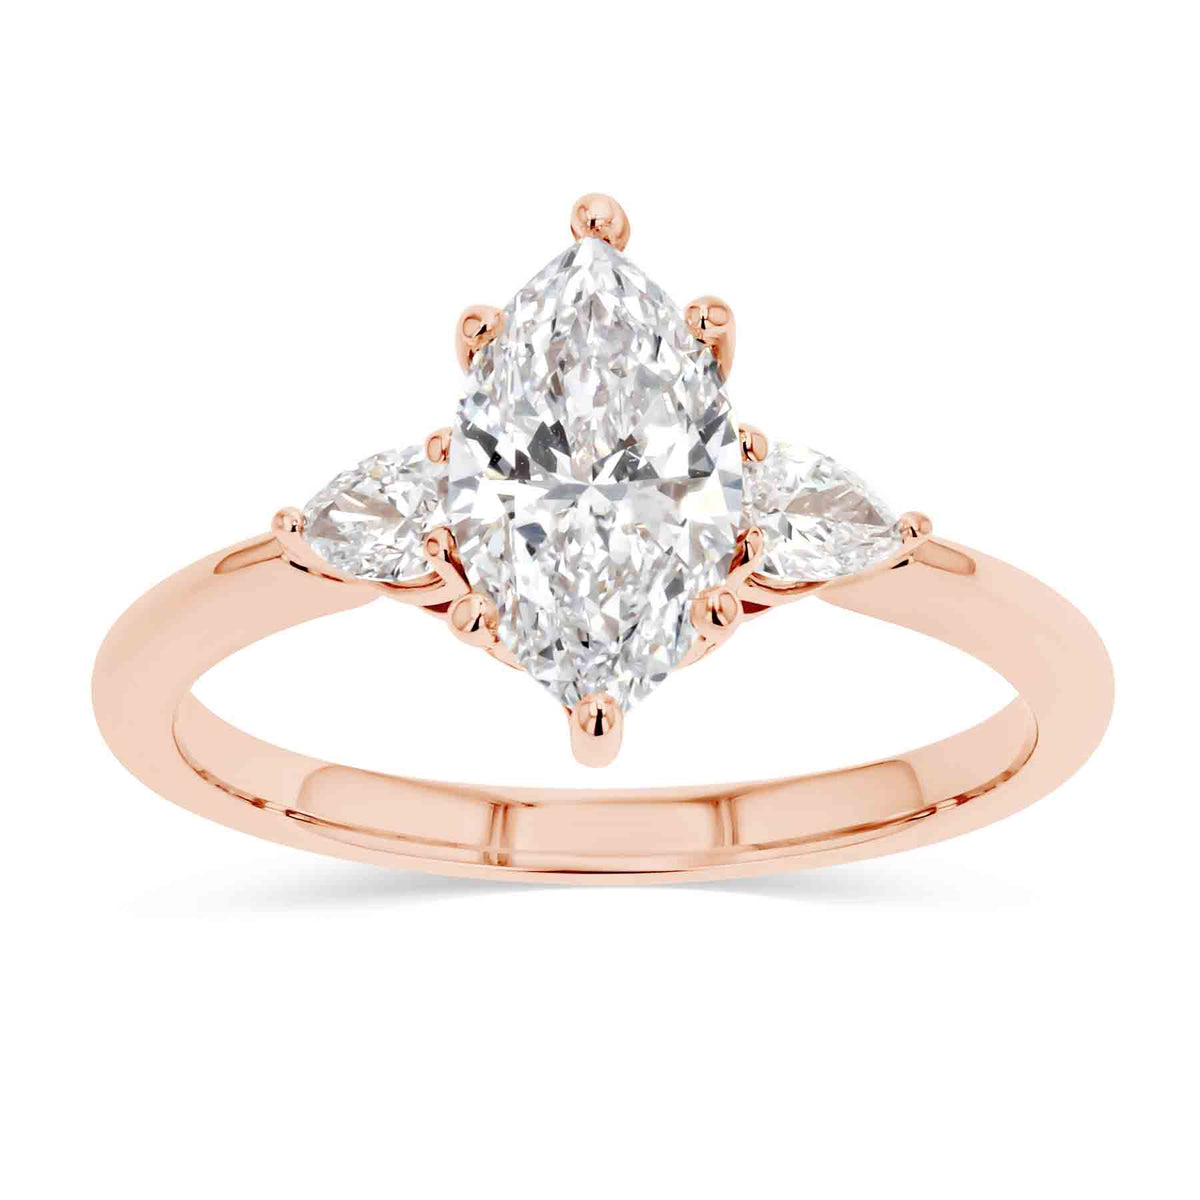 Flourish Three Stone Engagement Ring with a 1.15ct Lab-Grown Diamond center stone set in 14K Rose Gold